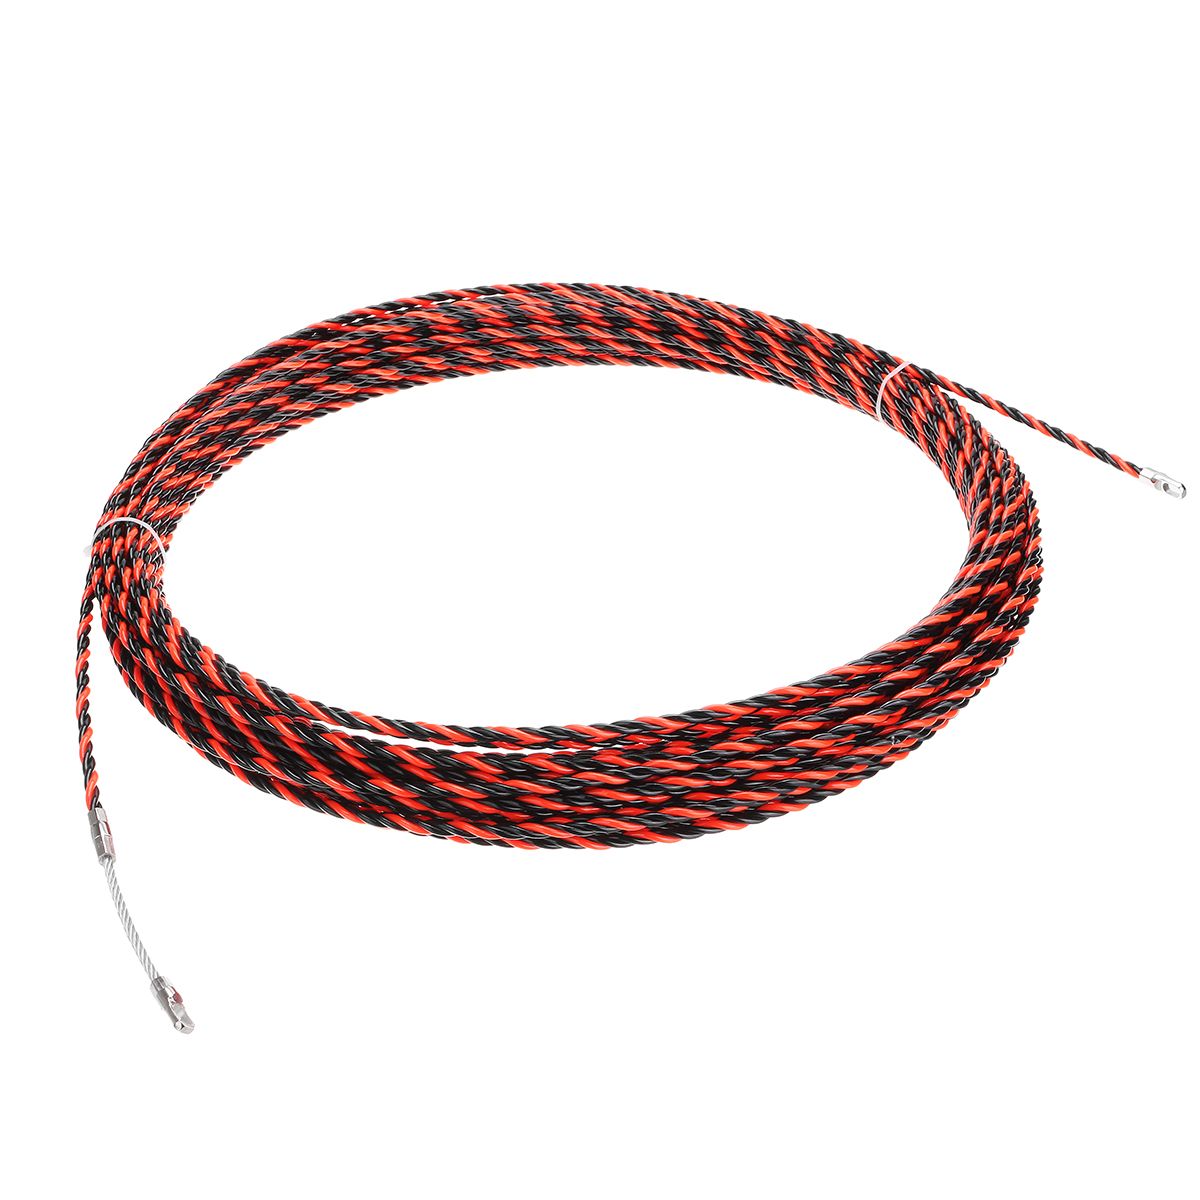 5m10m15m20m25m30m-Electrical-Fish-Tape-Cable-Push-Puller-Rodder-POM-Wire-1512390